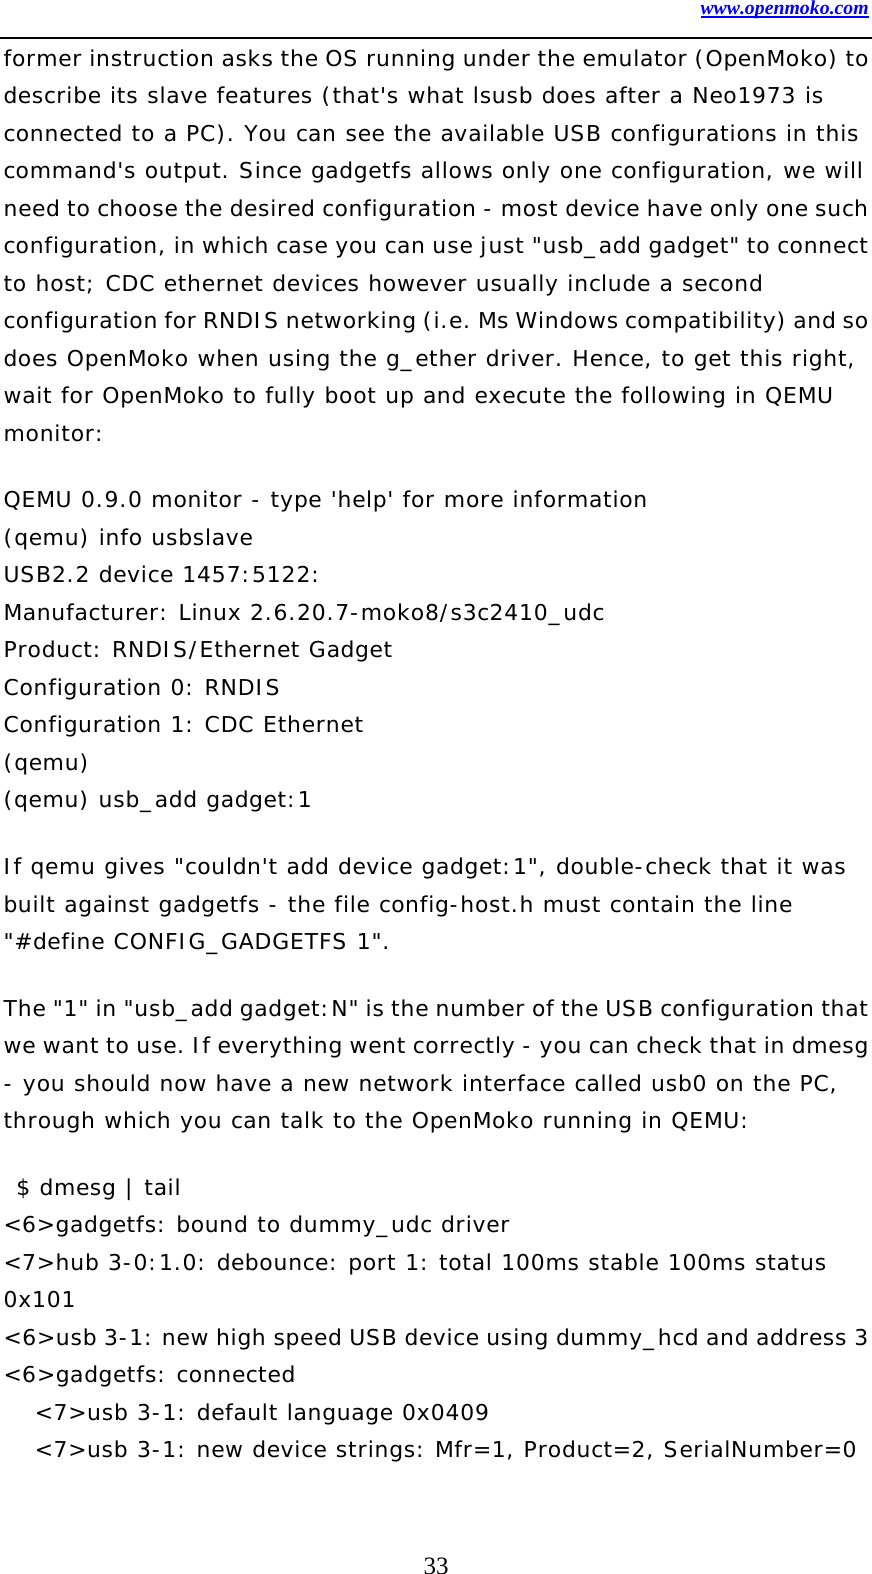 www.openmoko.com 33 former instruction asks the OS running under the emulator (OpenMoko) to describe its slave features (that&apos;s what lsusb does after a Neo1973 is connected to a PC). You can see the available USB configurations in this command&apos;s output. Since gadgetfs allows only one configuration, we will need to choose the desired configuration - most device have only one such configuration, in which case you can use just &quot;usb_add gadget&quot; to connect to host; CDC ethernet devices however usually include a second configuration for RNDIS networking (i.e. Ms Windows compatibility) and so does OpenMoko when using the g_ether driver. Hence, to get this right, wait for OpenMoko to fully boot up and execute the following in QEMU monitor:  QEMU 0.9.0 monitor - type &apos;help&apos; for more information (qemu) info usbslave  USB2.2 device 1457:5122: Manufacturer: Linux 2.6.20.7-moko8/s3c2410_udc Product: RNDIS/Ethernet Gadget Configuration 0: RNDIS Configuration 1: CDC Ethernet (qemu)  (qemu) usb_add gadget:1 If qemu gives &quot;couldn&apos;t add device gadget:1&quot;, double-check that it was built against gadgetfs - the file config-host.h must contain the line &quot;#define CONFIG_GADGETFS 1&quot;.   The &quot;1&quot; in &quot;usb_add gadget:N&quot; is the number of the USB configuration that we want to use. If everything went correctly - you can check that in dmesg - you should now have a new network interface called usb0 on the PC, through which you can talk to the OpenMoko running in QEMU:   $ dmesg | tail &lt;6&gt;gadgetfs: bound to dummy_udc driver &lt;7&gt;hub 3-0:1.0: debounce: port 1: total 100ms stable 100ms status 0x101 &lt;6&gt;usb 3-1: new high speed USB device using dummy_hcd and address 3 &lt;6&gt;gadgetfs: connected &lt;7&gt;usb 3-1: default language 0x0409 &lt;7&gt;usb 3-1: new device strings: Mfr=1, Product=2, SerialNumber=0 